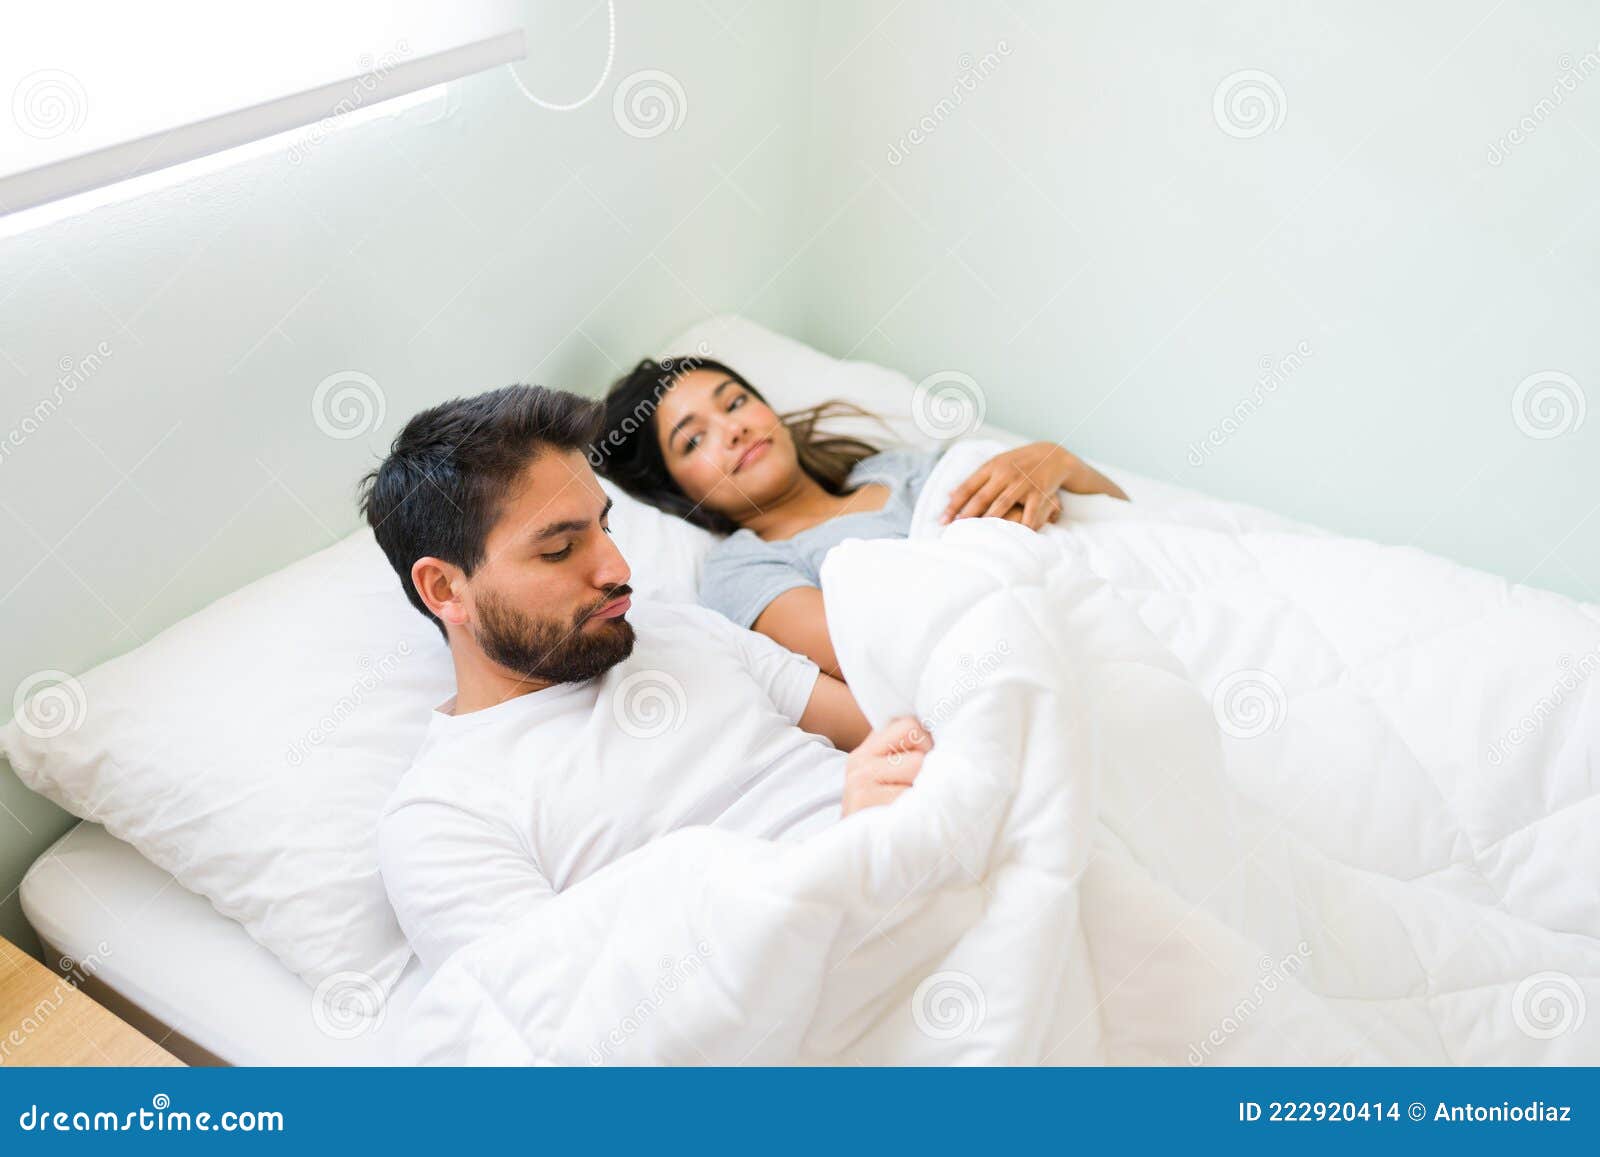 Sad Husband with Problems in the Bedroom Stock Photo